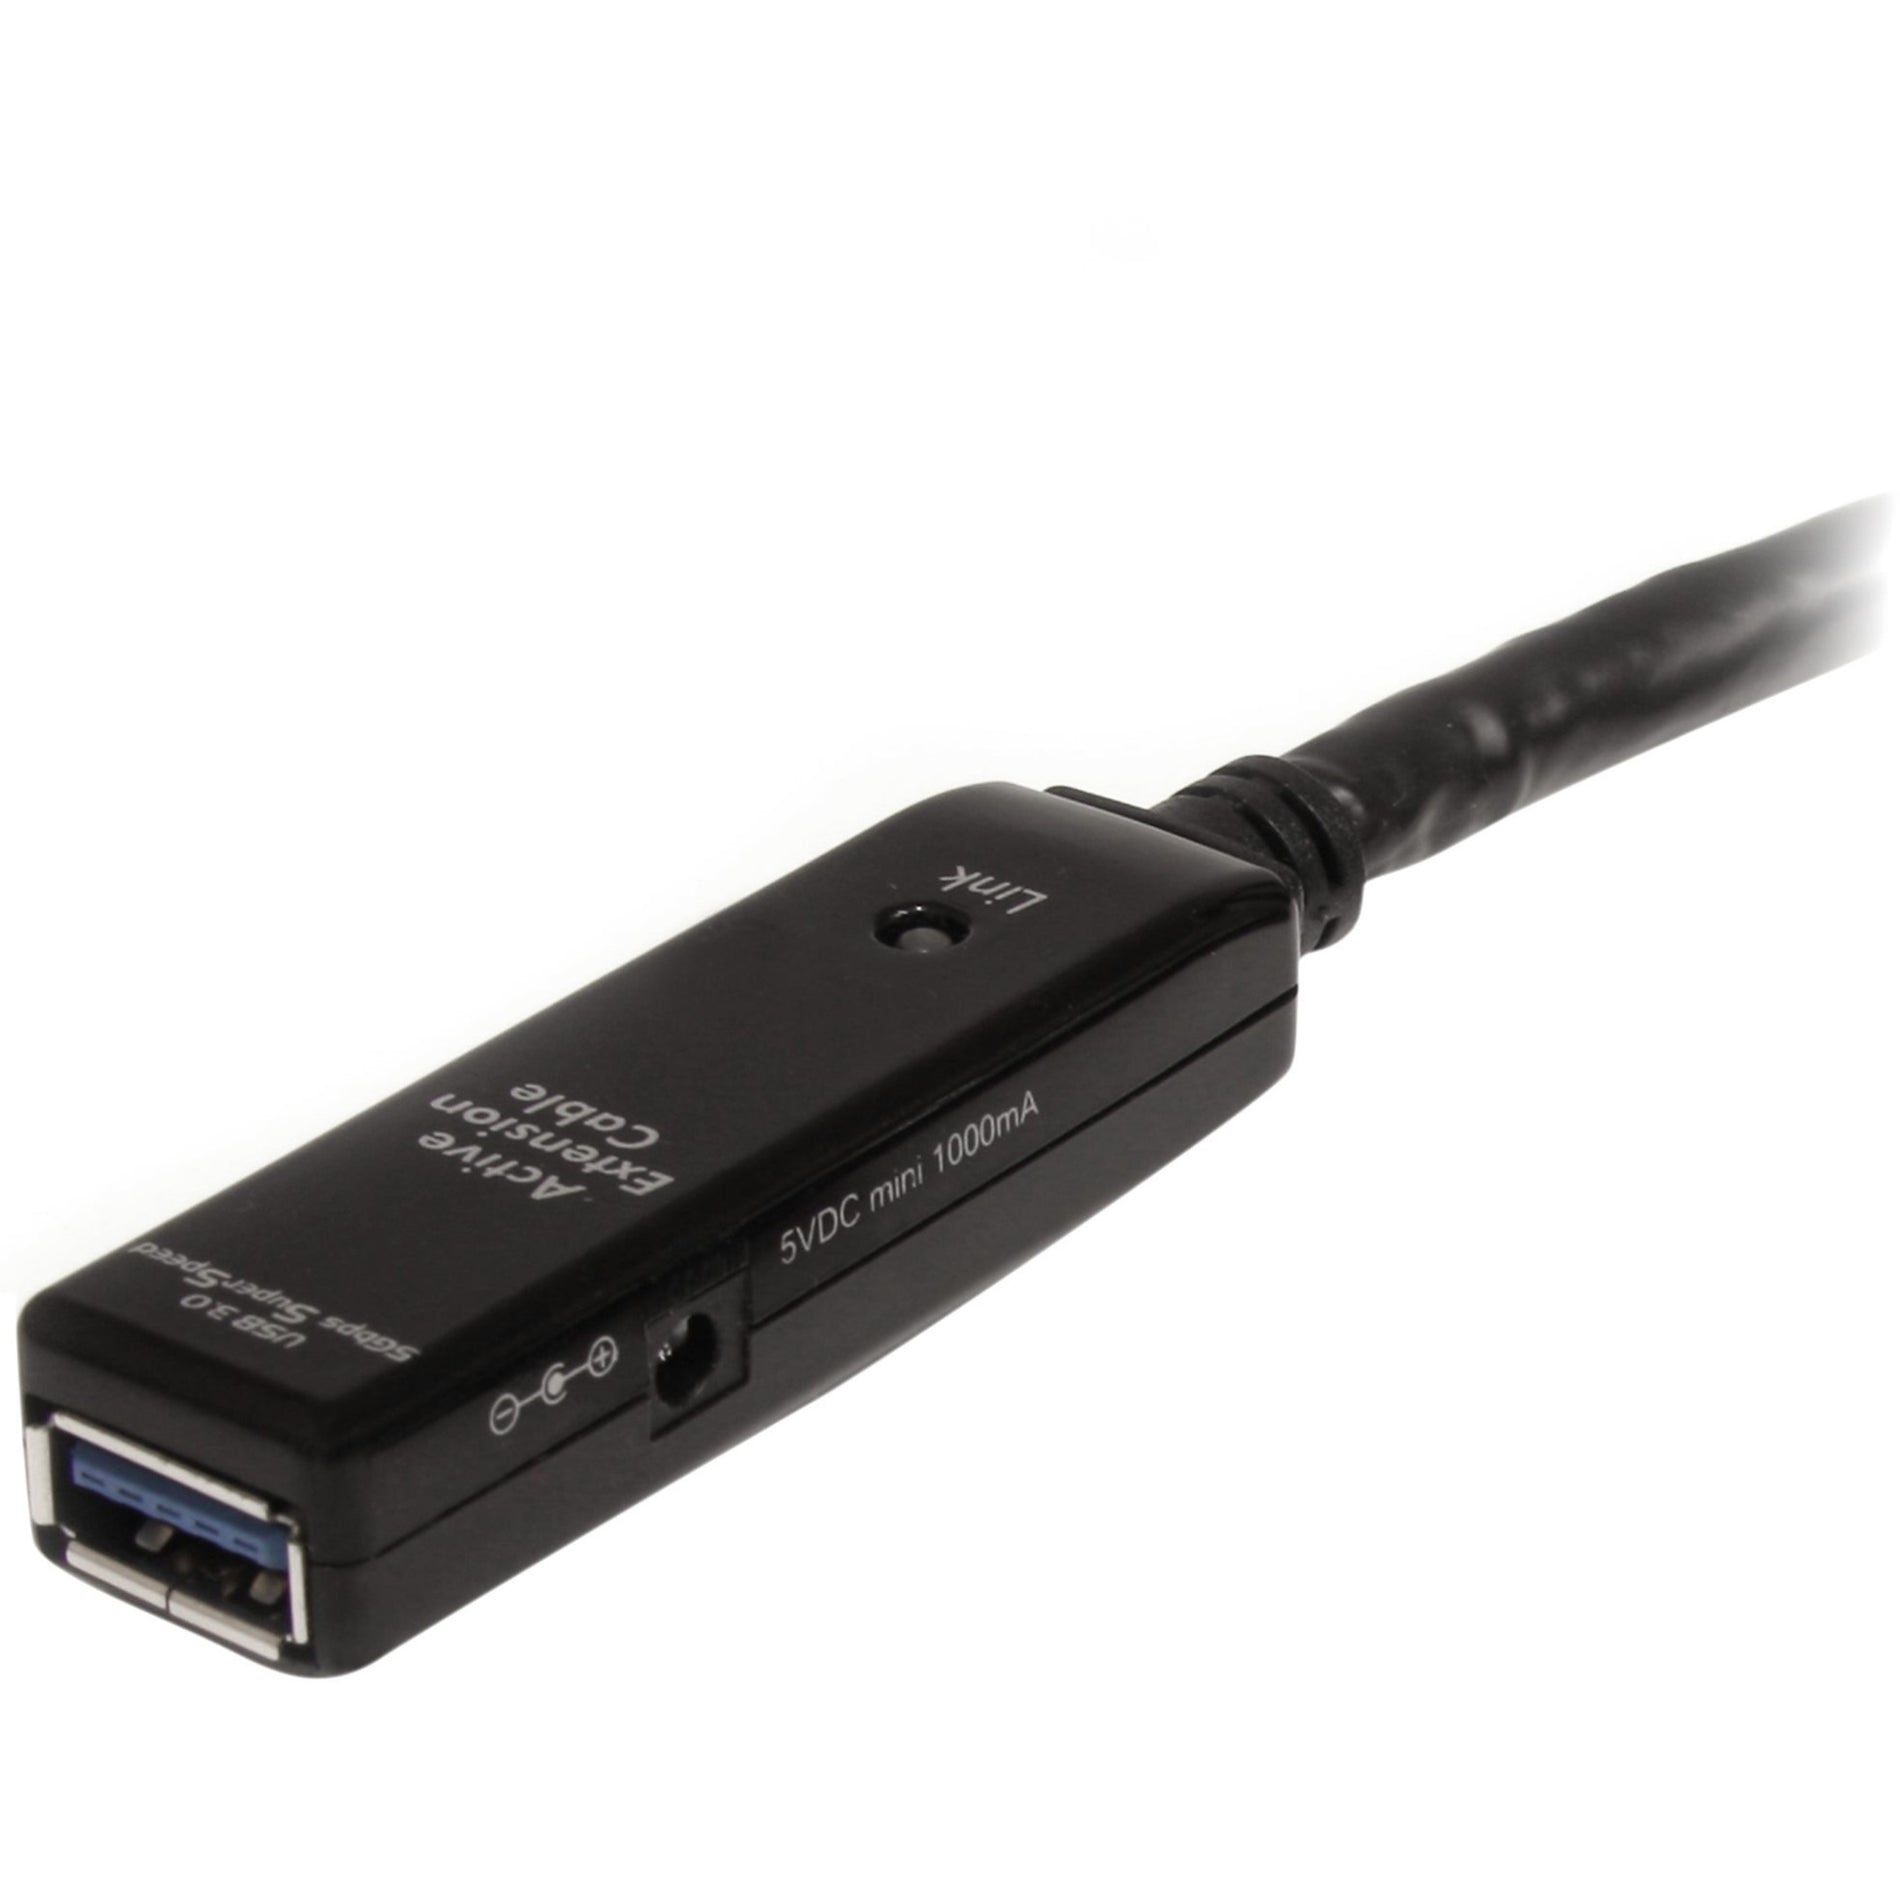 StarTech.com USB3AAEXT10M 10m USB 3.0 Active Extension Cable - M/F, Plug & Play, 5 Gbit/s Data Transfer Rate